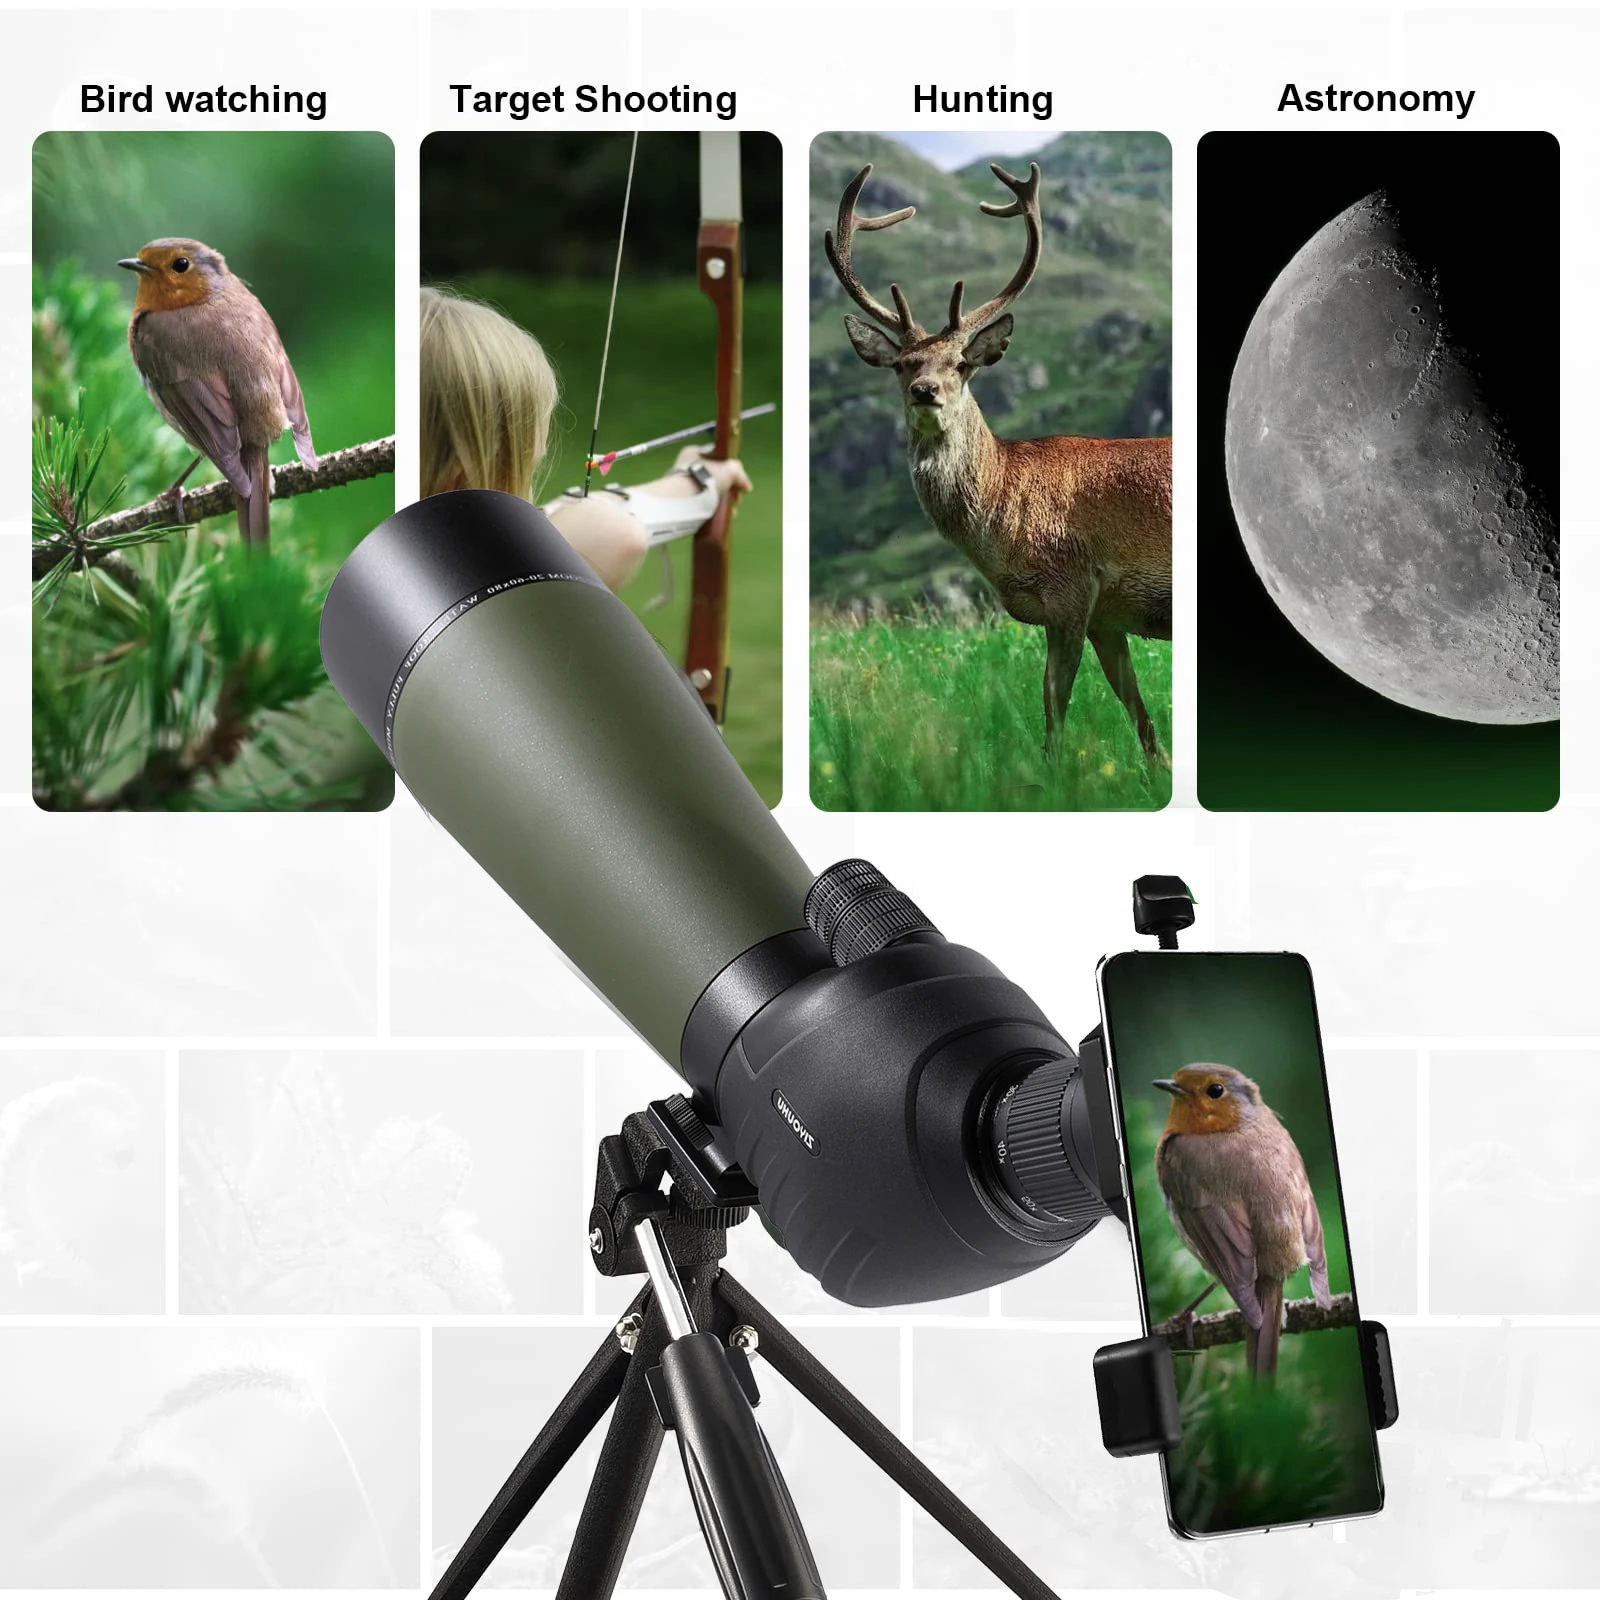 20-60X80 Monoculars Dual Focusing Telescope Spotter Scope with Tripod for Target Shooting Hunting Bird Watching Moon Observing images - 6